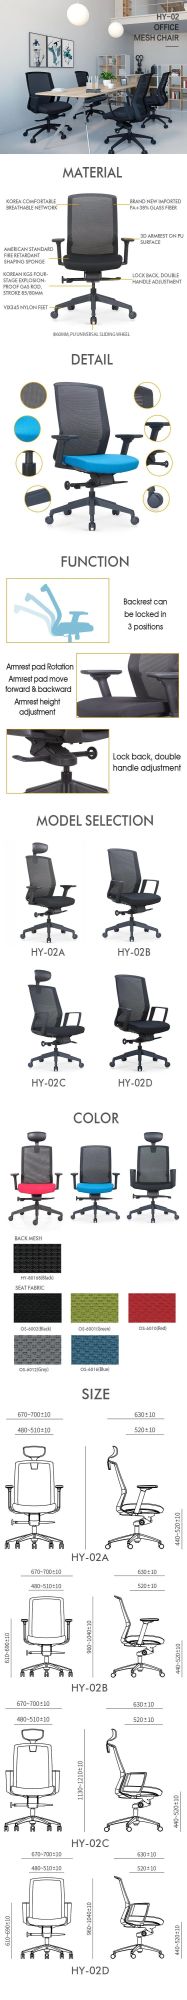 Factory Office Full Mesh Chair with Advanced Design BIFMA Certificate